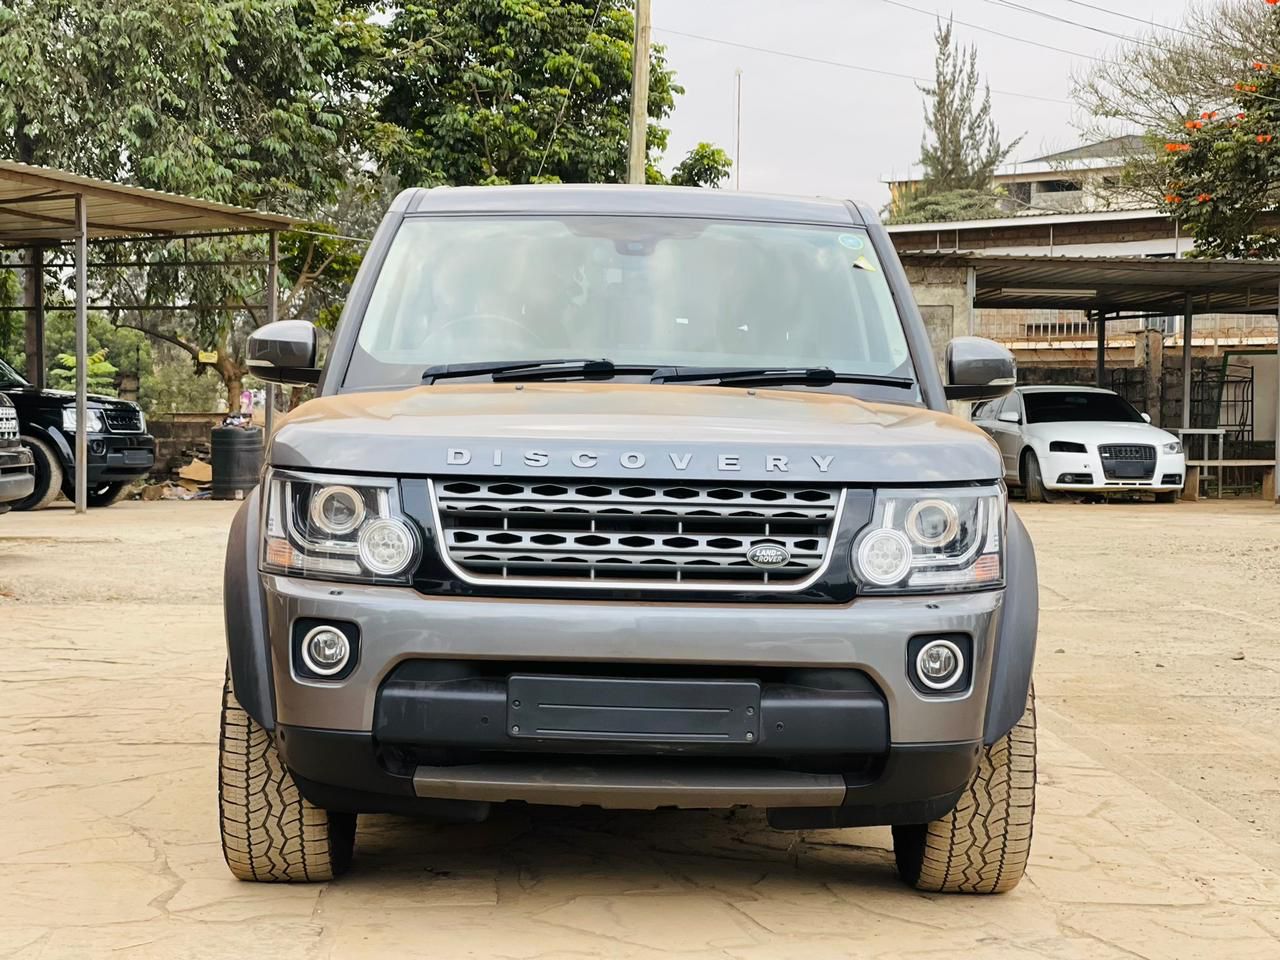 Landrover Discovery 4 XS 2015 NEW OFFER! Pay 50% Deposit